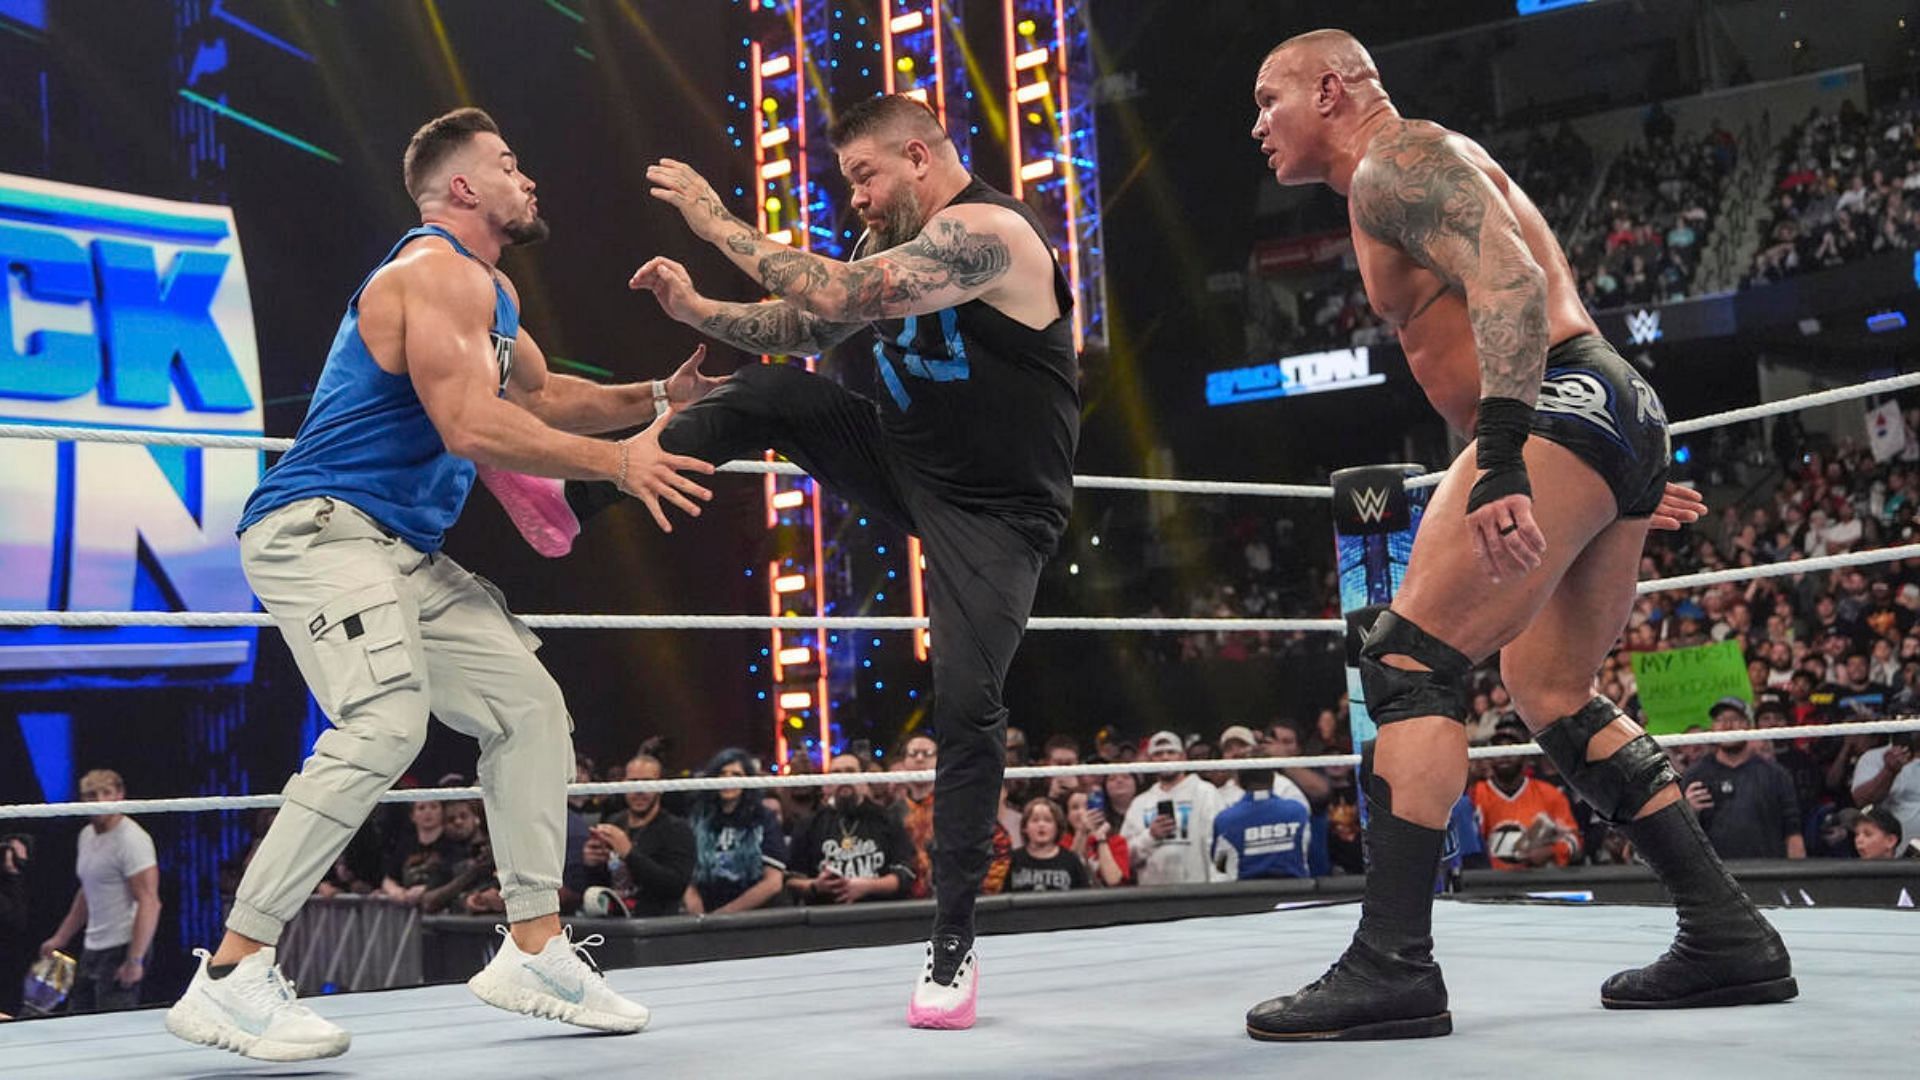 Austin Theory, Kevin Owens, and Randy Orton on SmackDown.